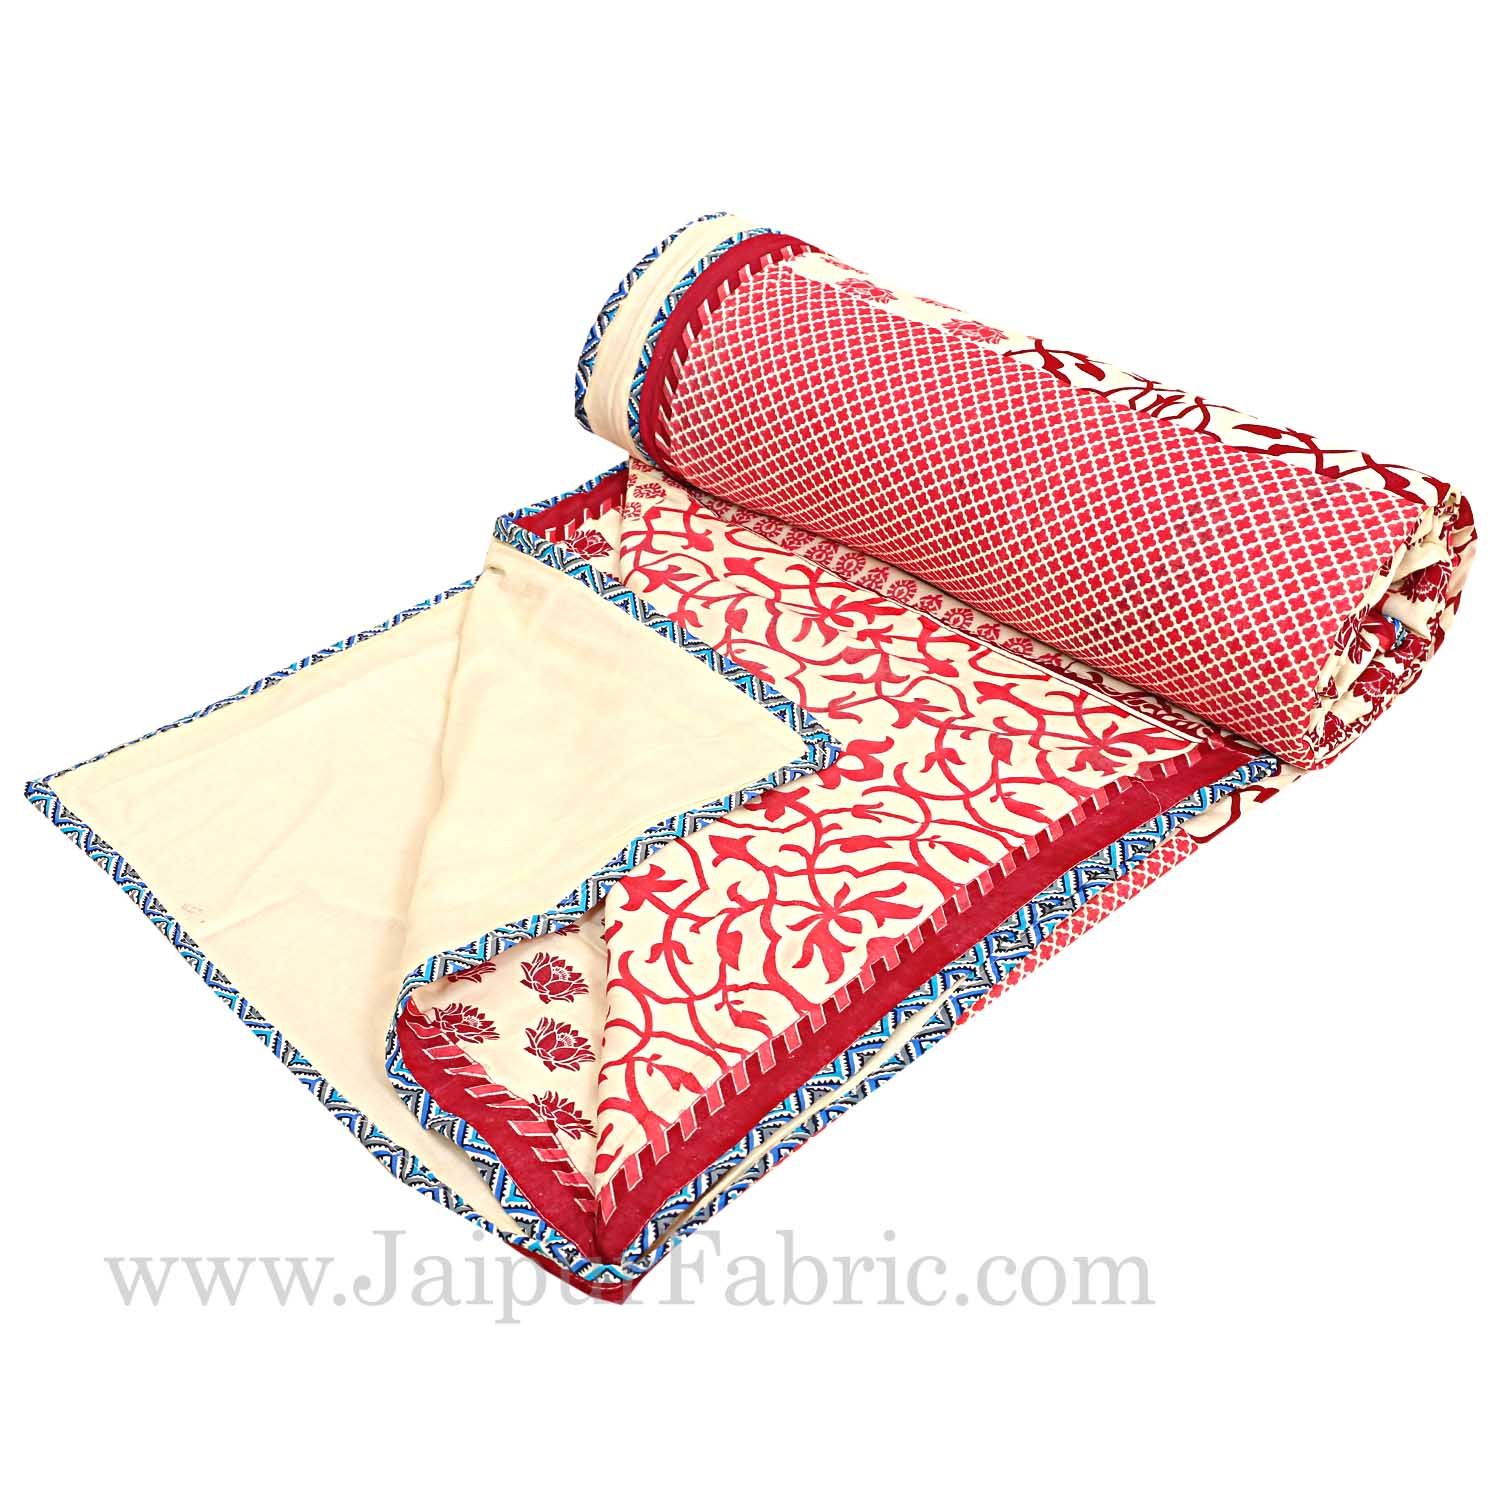 Double Bed Dohar Smooth Cotton Cover Small  Boota Print Use As ( Blanket, Chaddar,Ac Quilt)